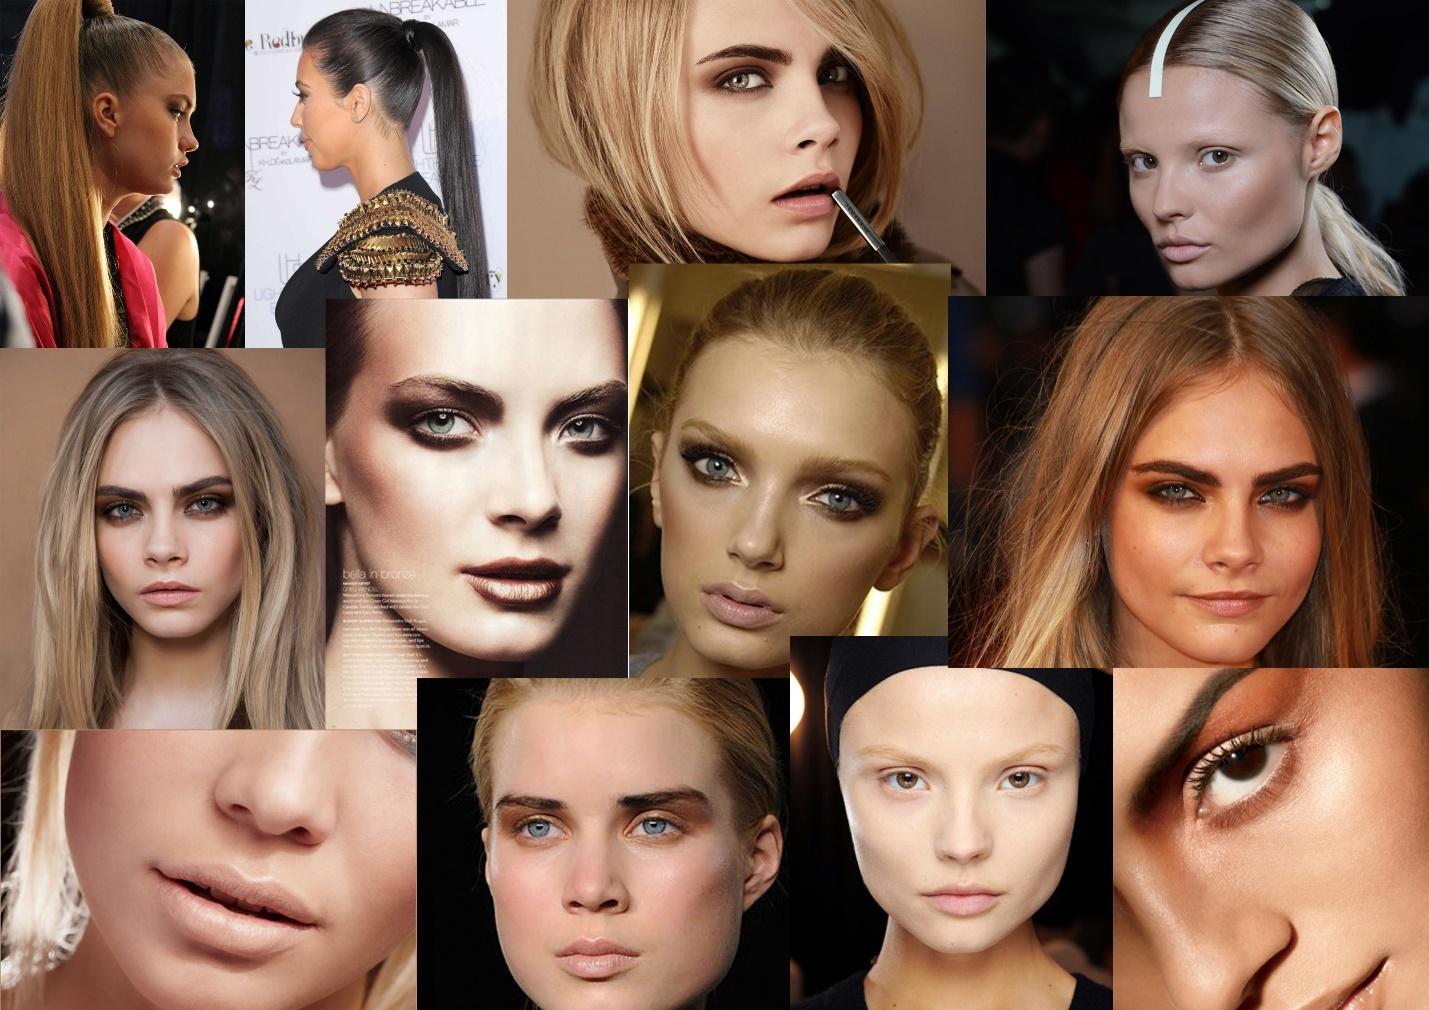 A collage of different women's faces

Description automatically generated